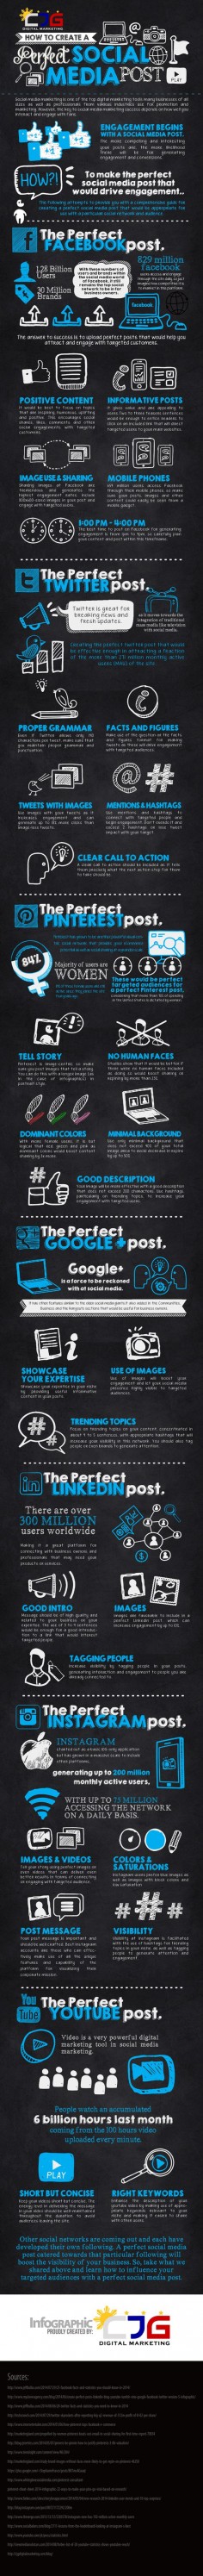 The Best Tips To Generate Interesting And Engaging Posts On The Top 7 Social Media Networks - #socialmedia #infographic